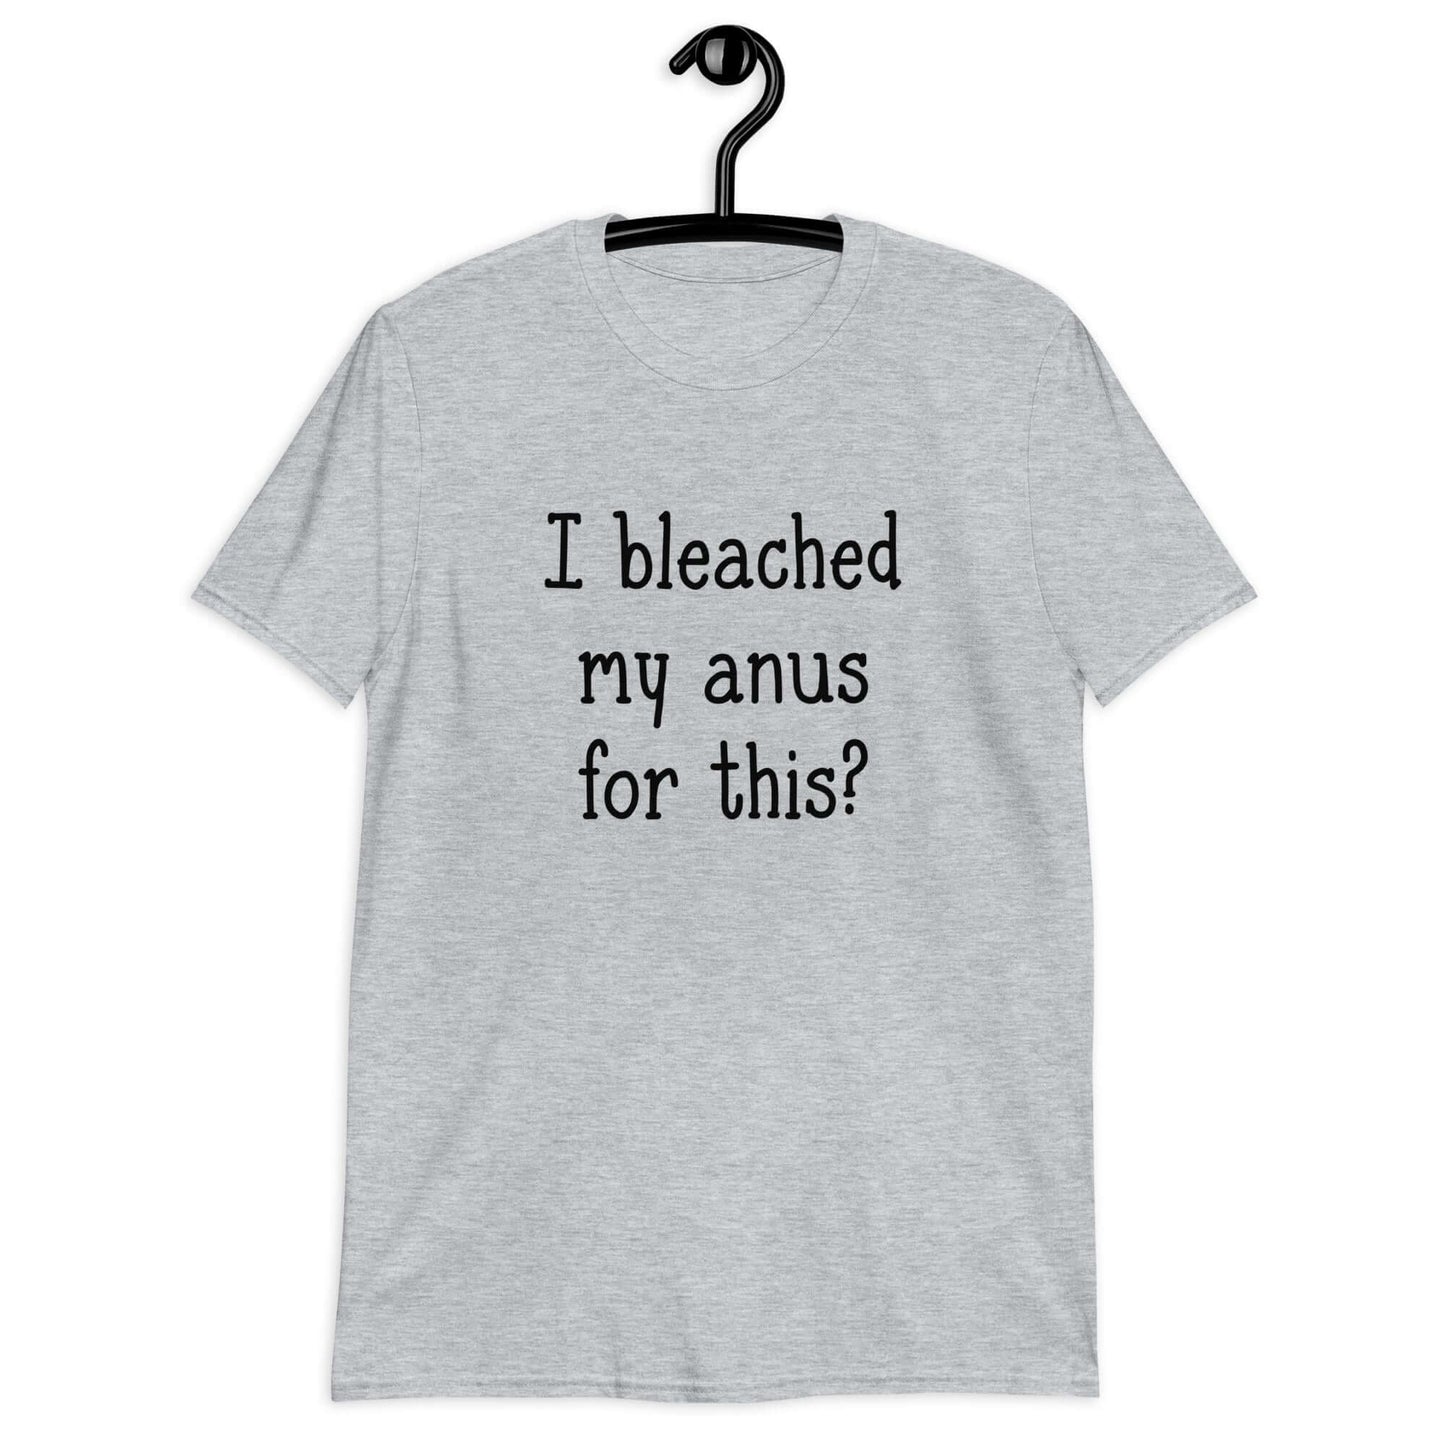 sport grey t-shirt that has "I bleached my anus for this?" printed on the front